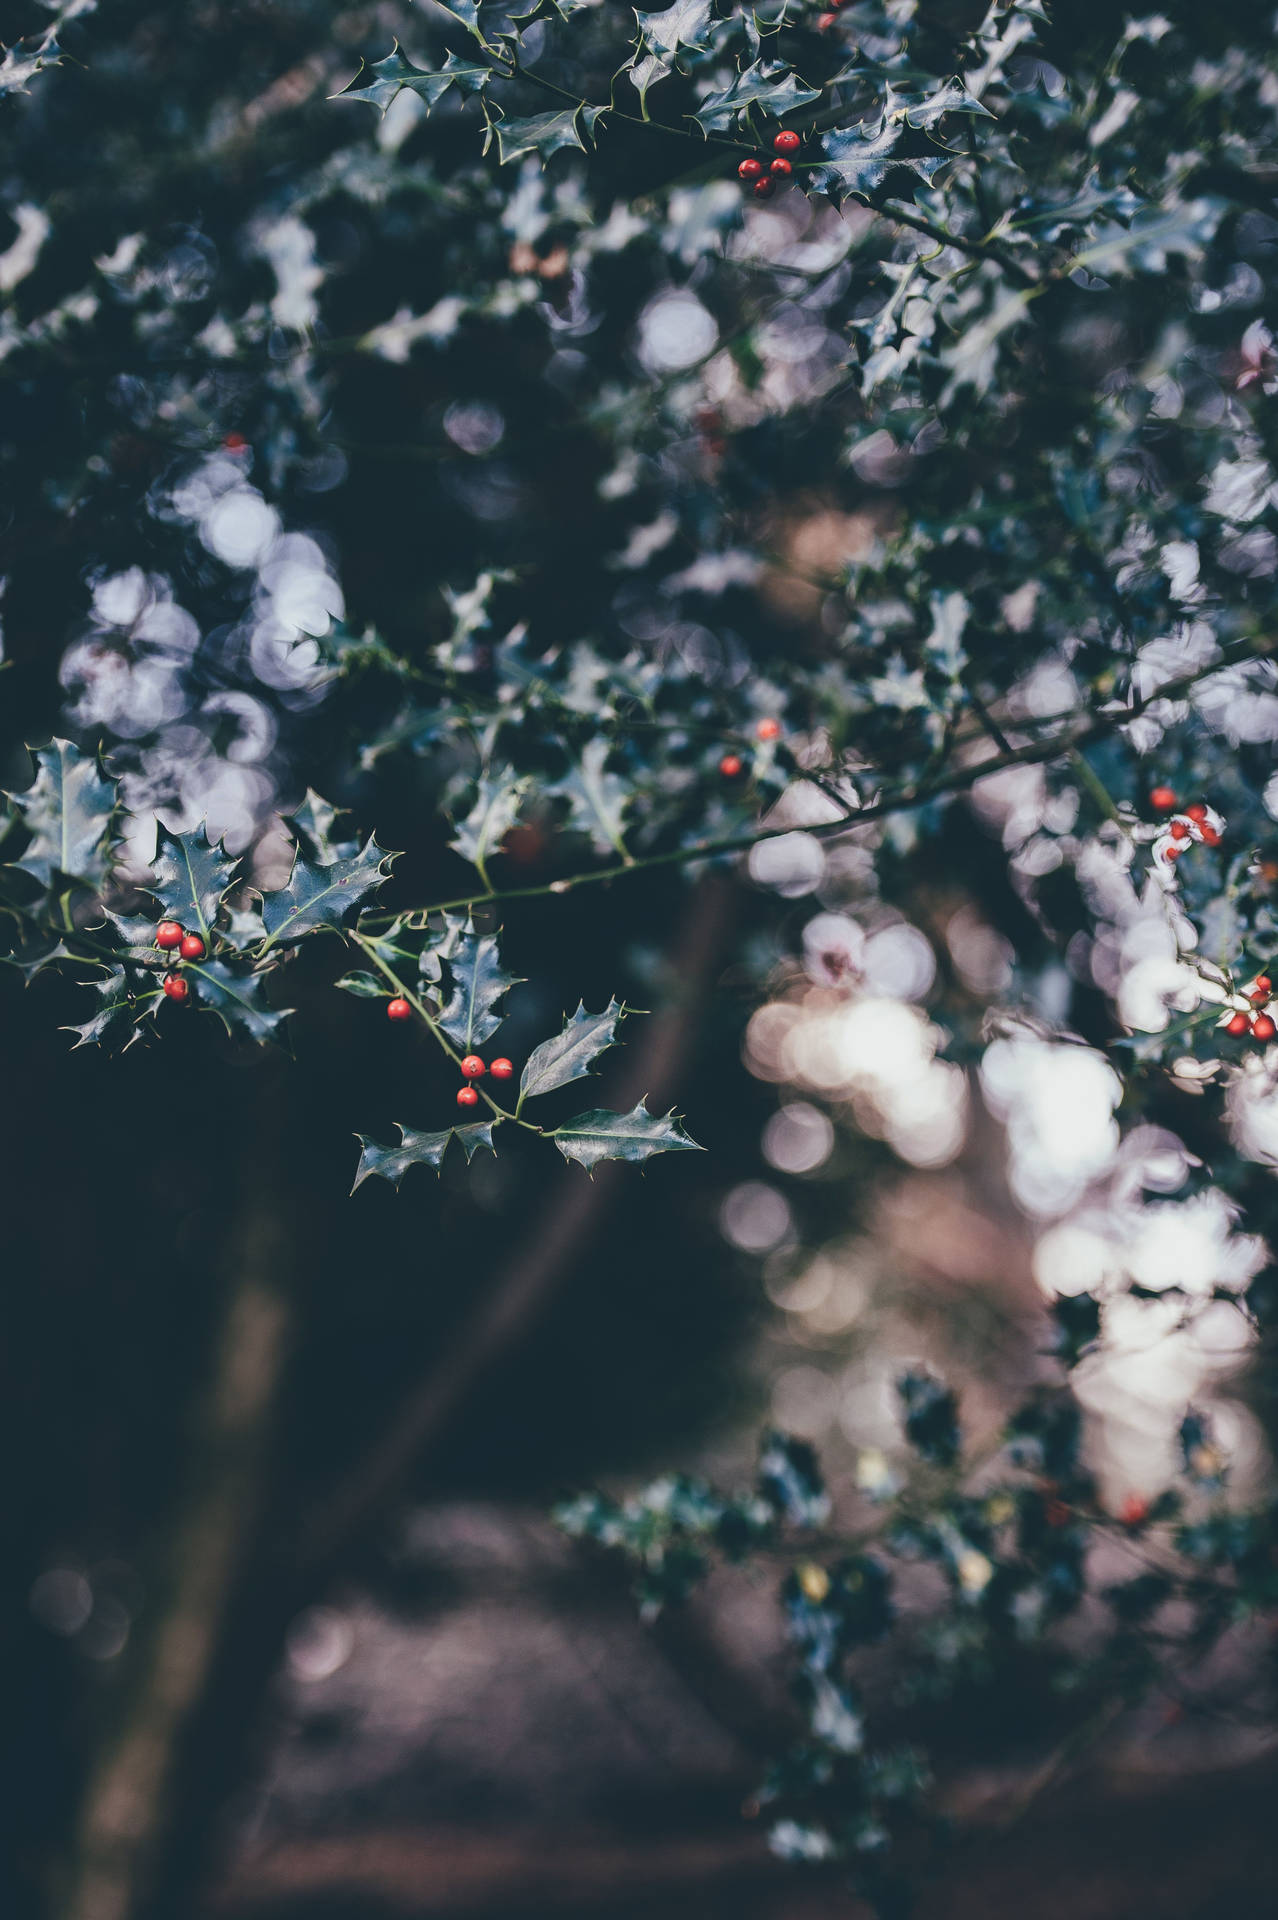 Decorate your iPhone this holiday season with this festive holly tree branch image Wallpaper